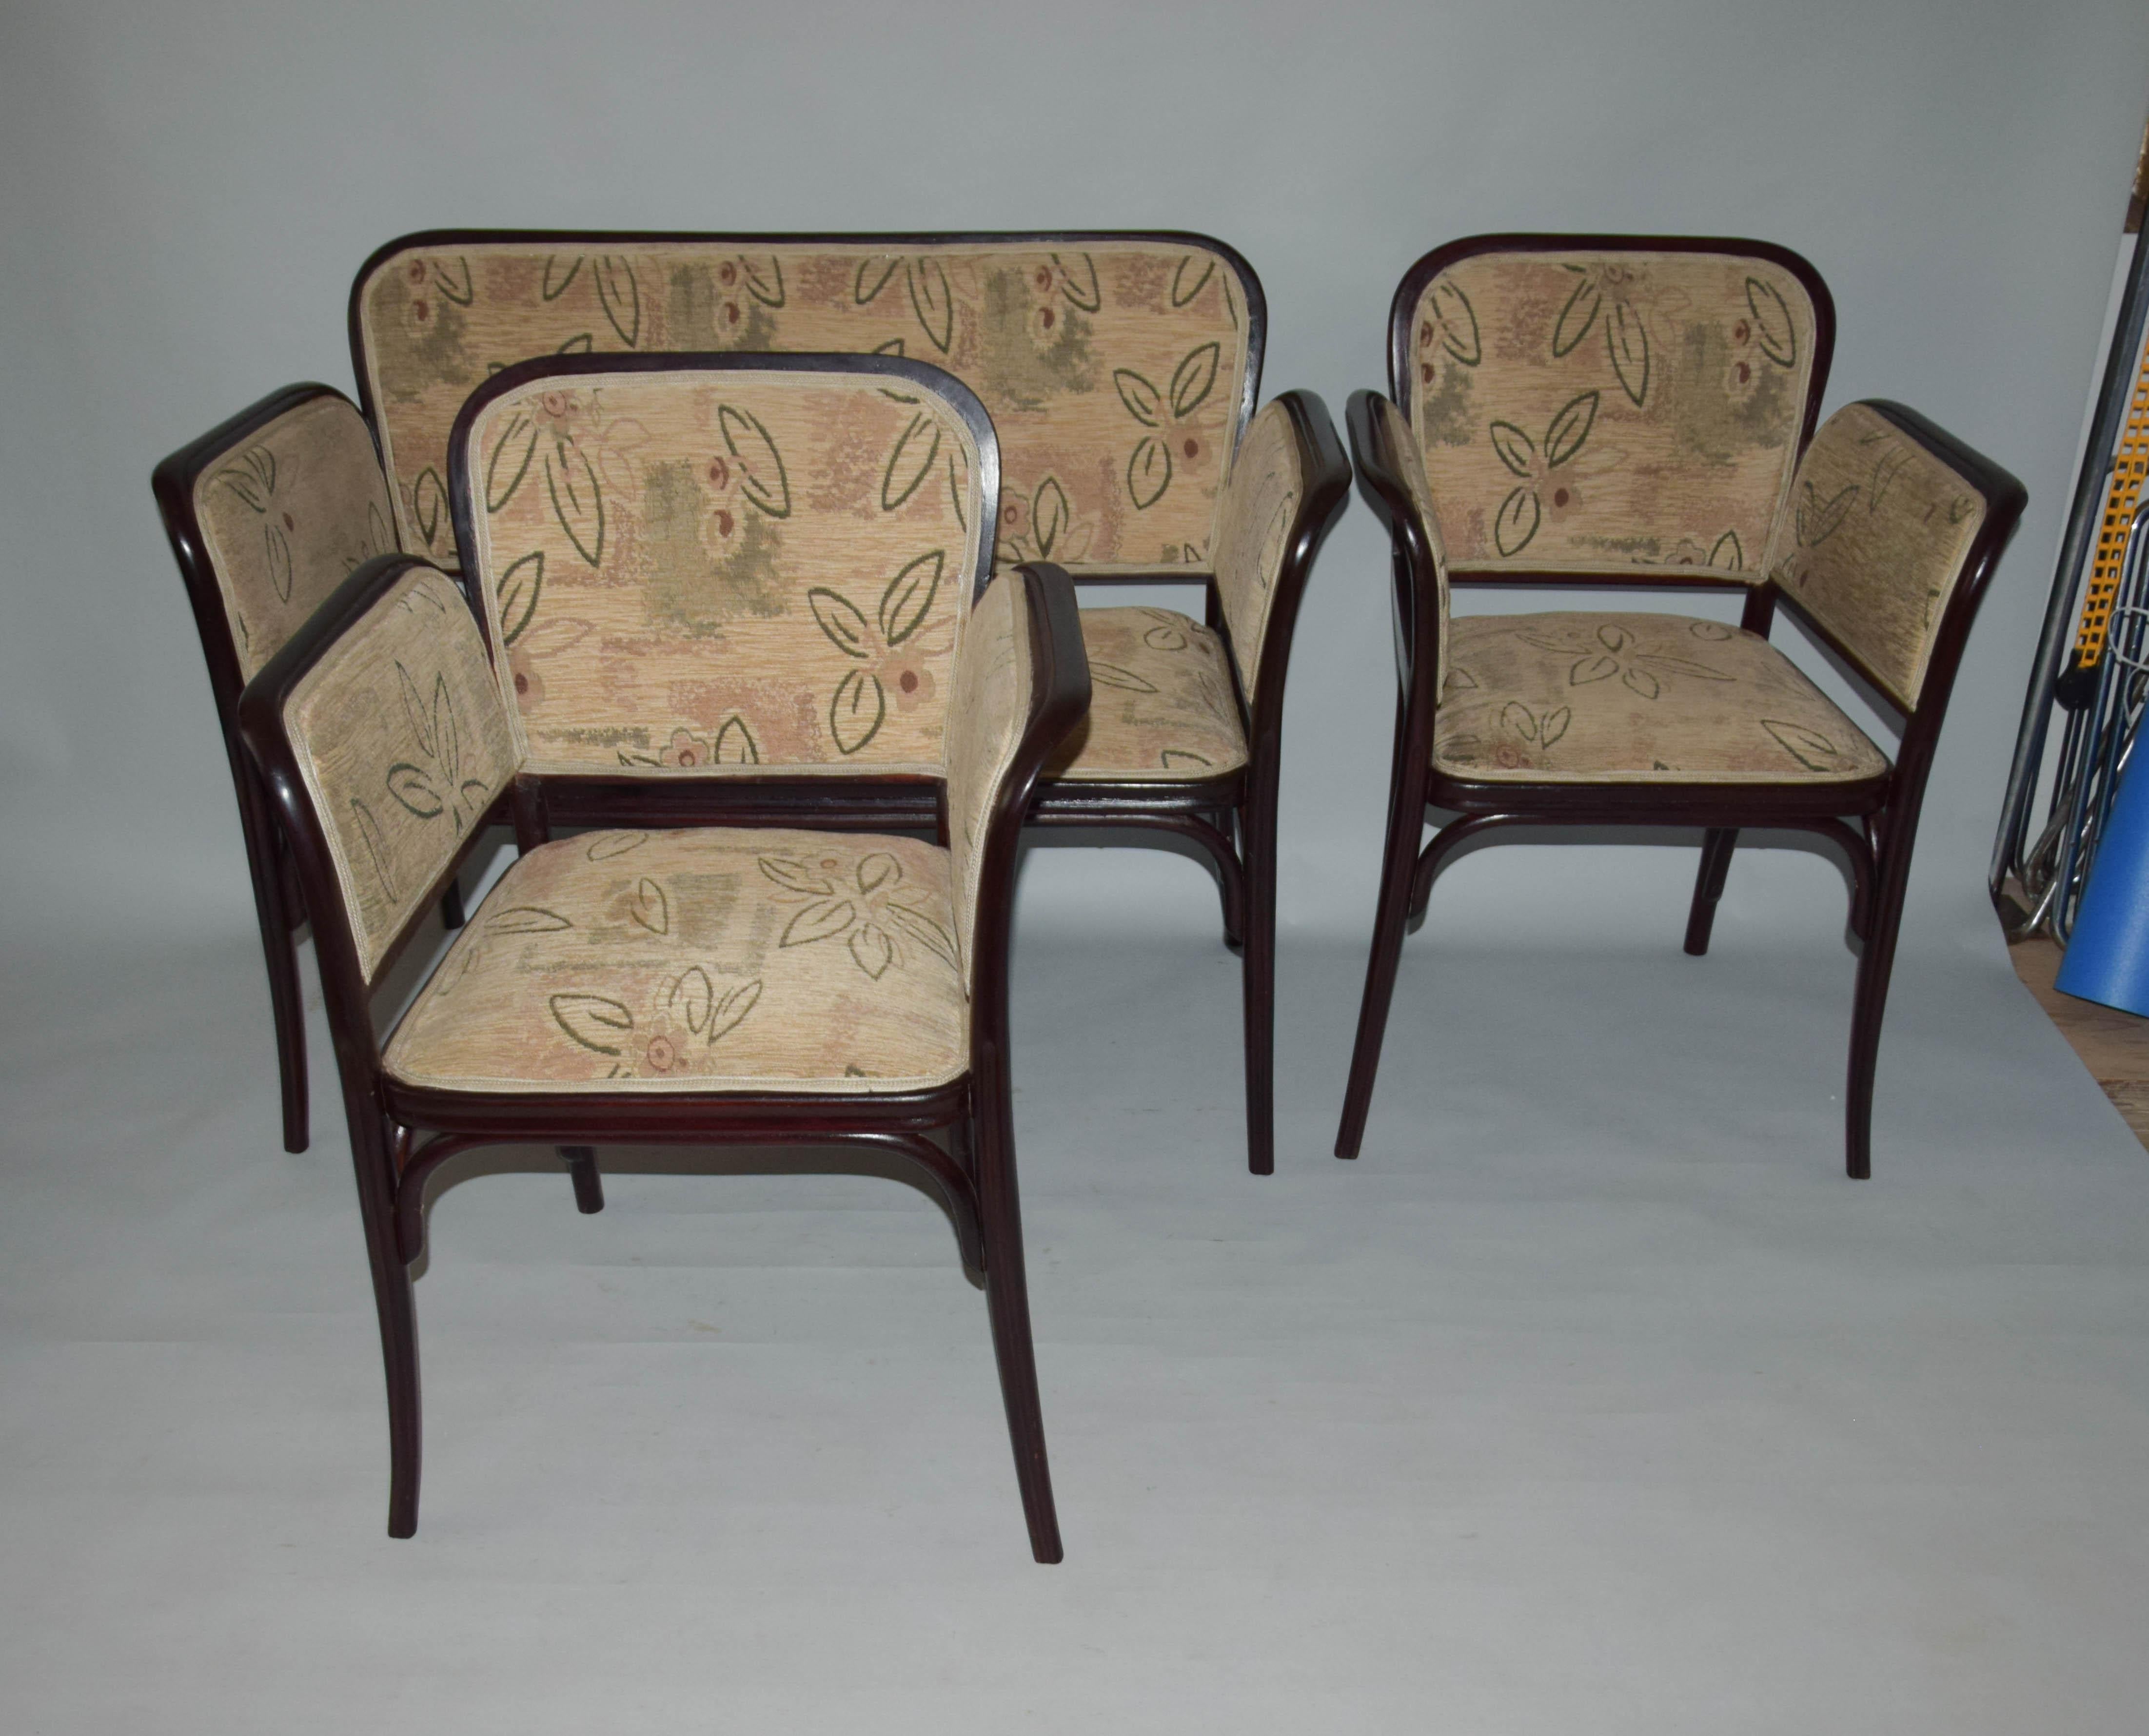 Early 20th Century Art Nouveau Seating Set by Otto Wagner for Thonet, 1910s For Sale